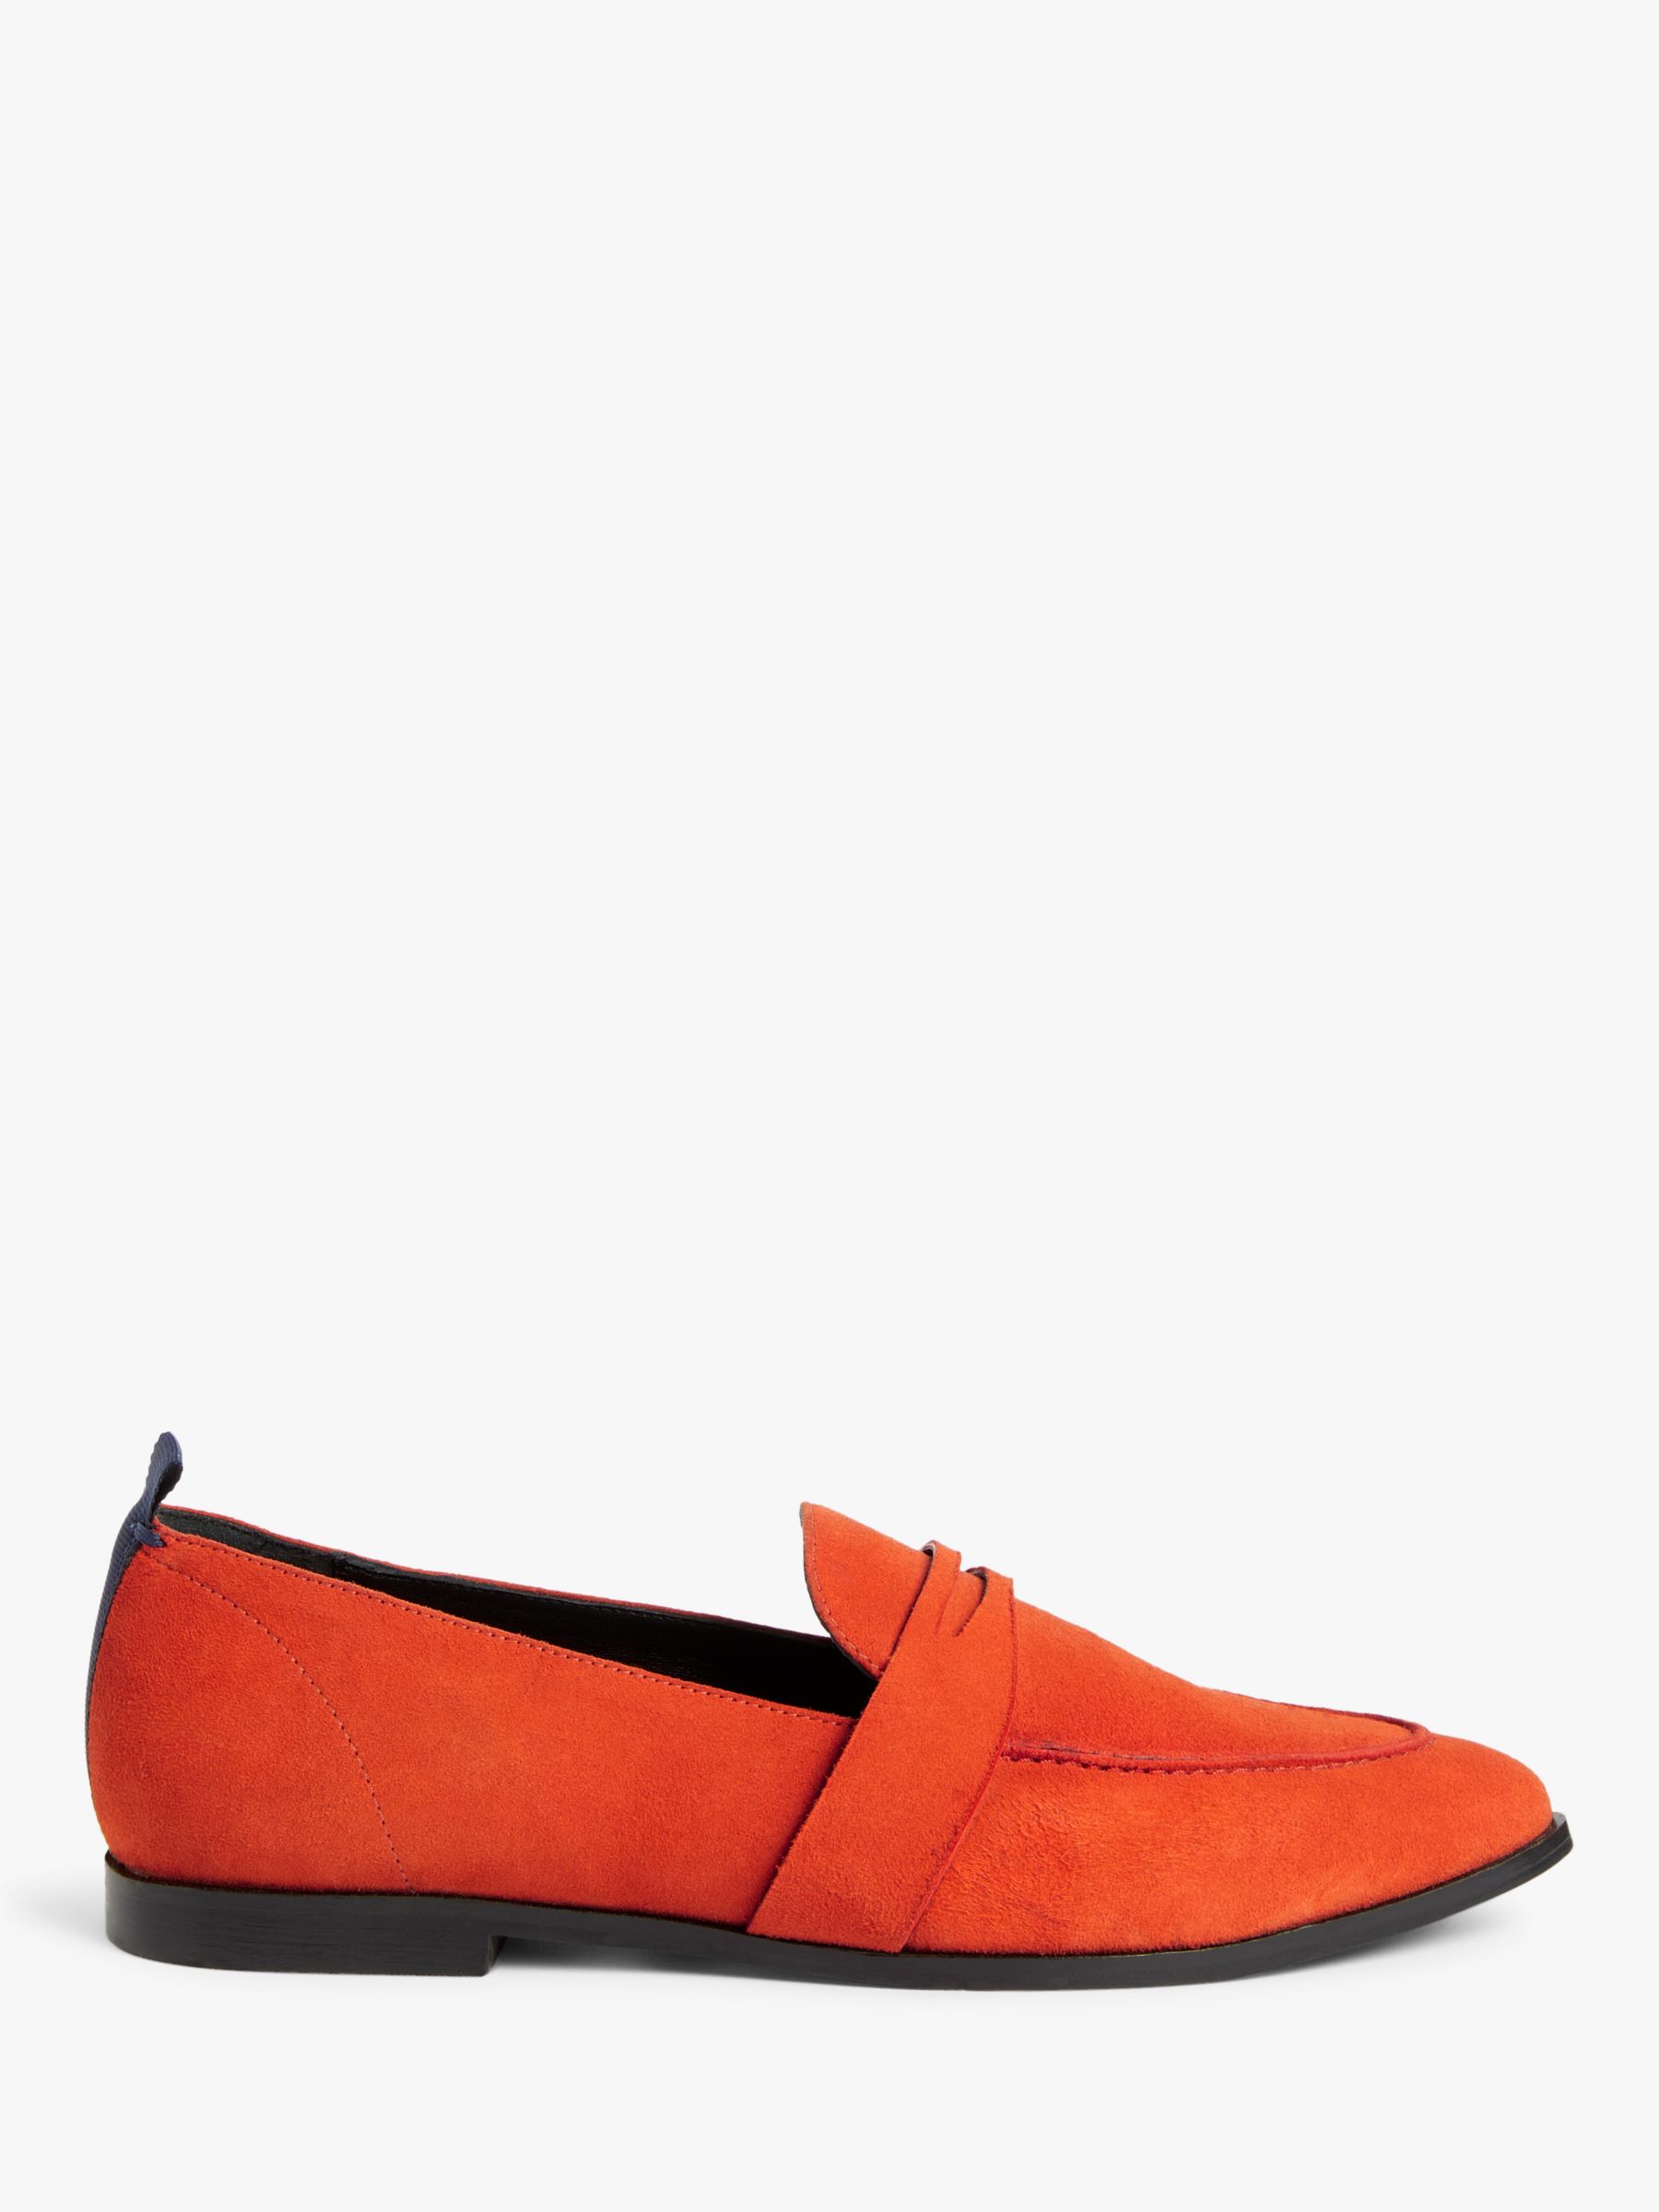 Kin Ginny Pointed Suede Loafers, Orange